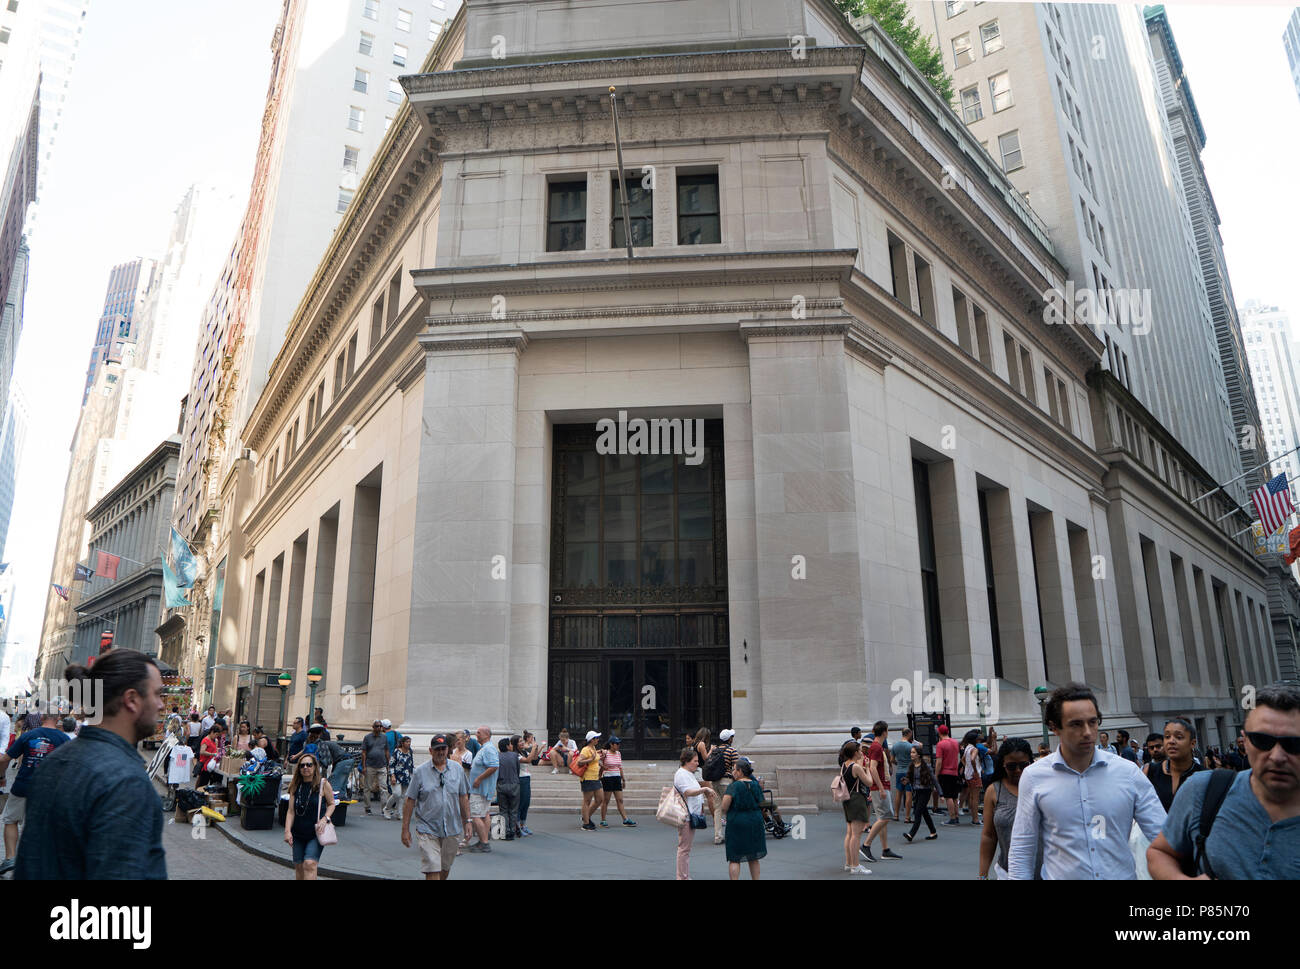 The four-story building at 23 Wall St. opened in 1913 as the headquarters of the J.P. Morgan Bank. It’s a New York City landmark. Stock Photo